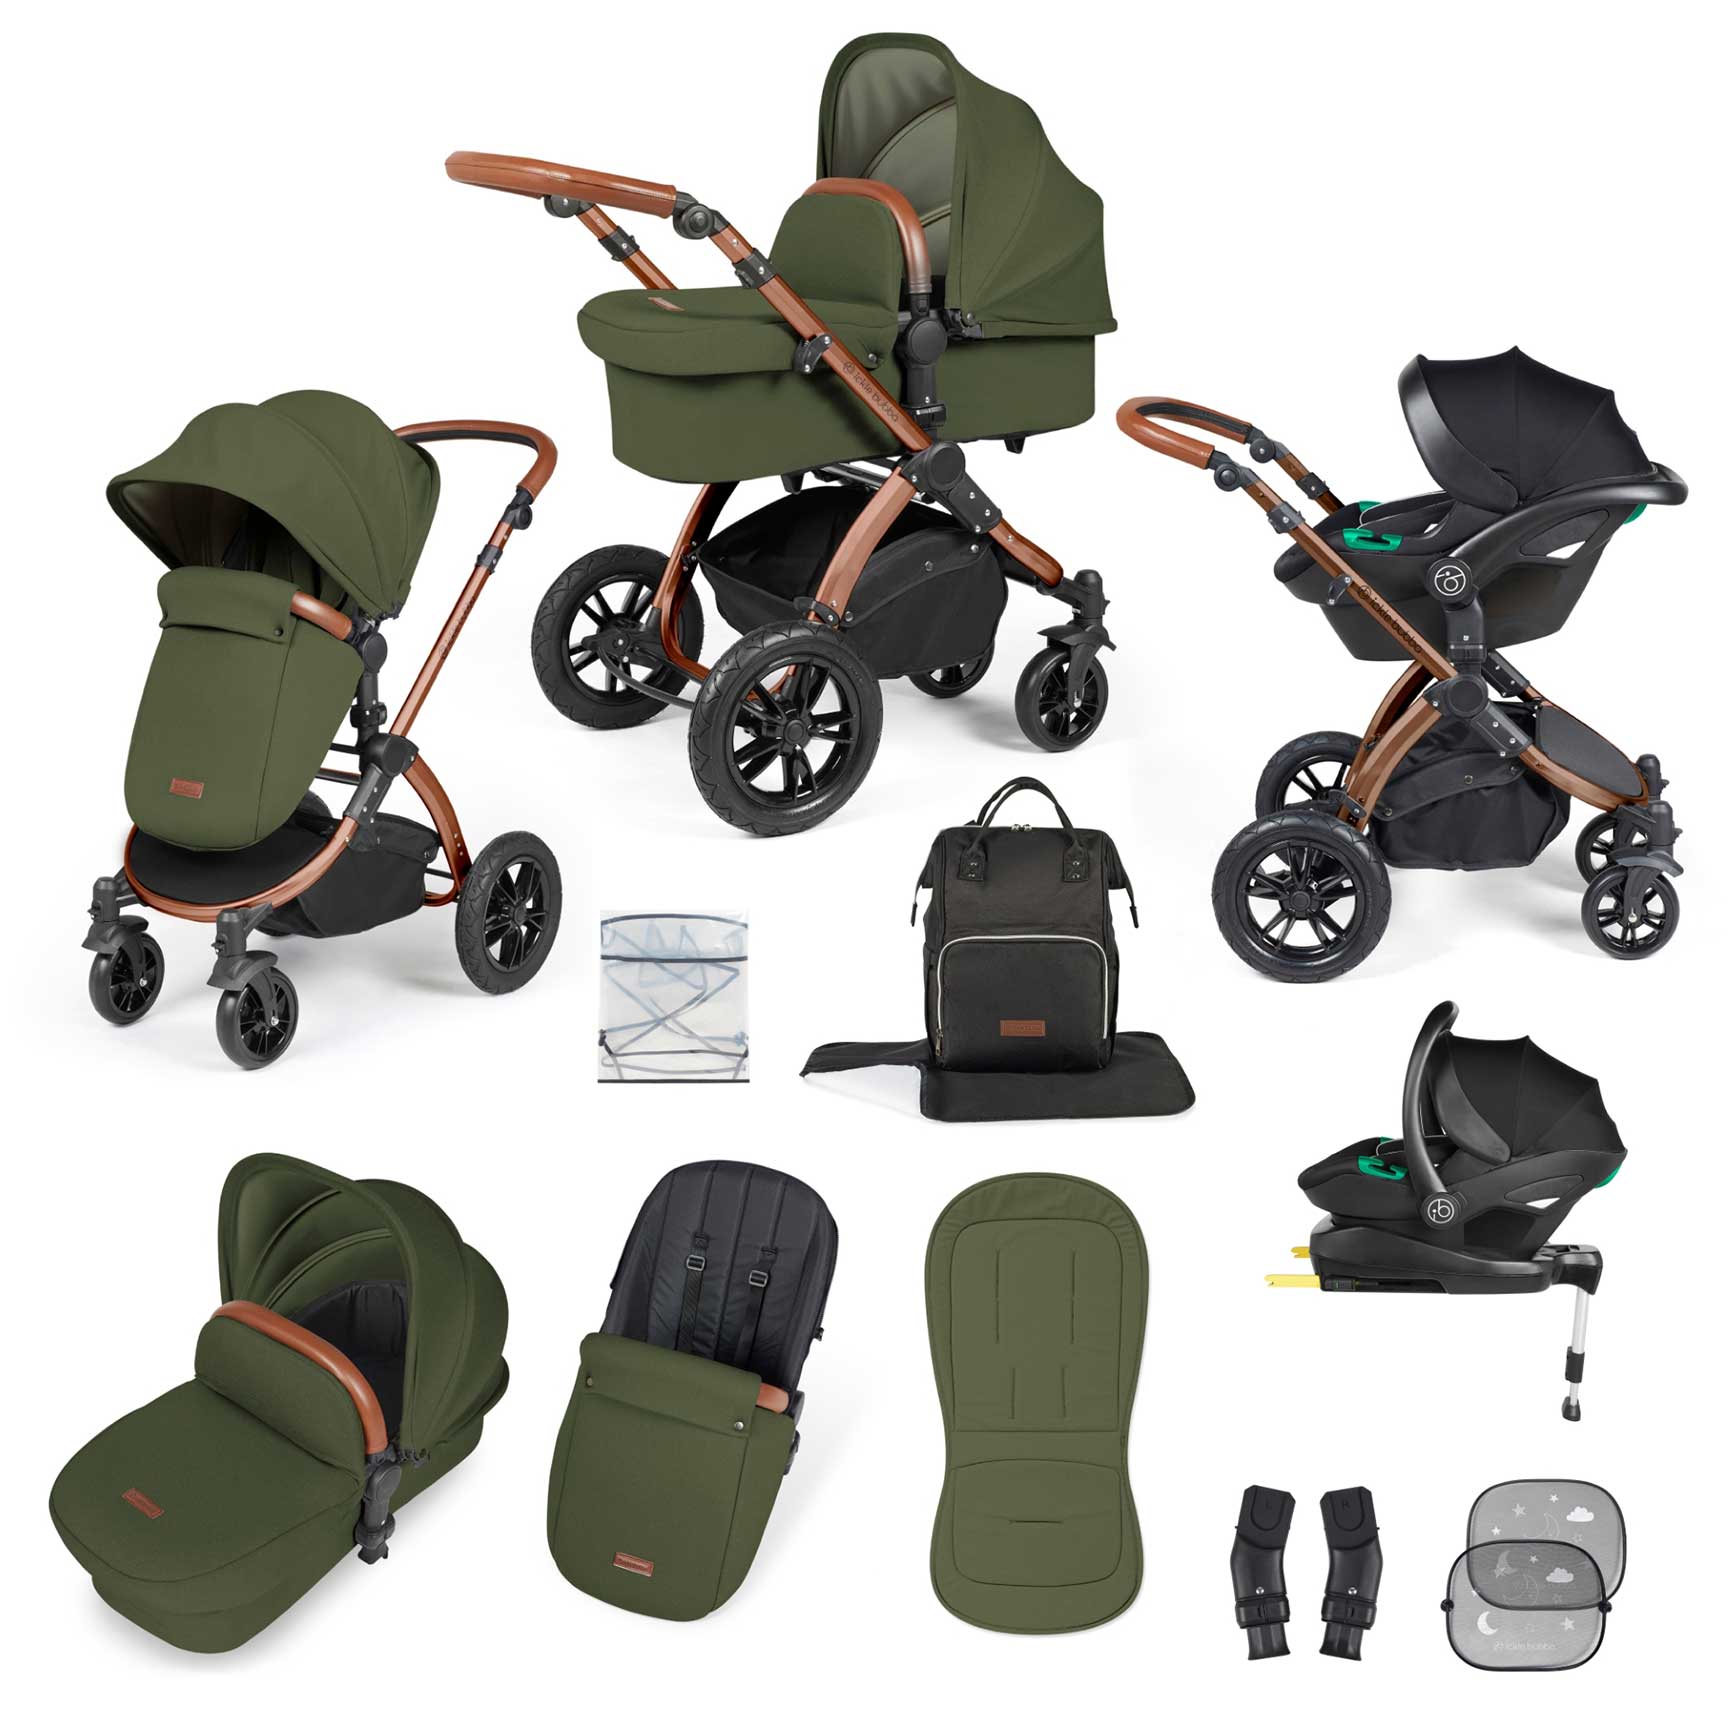 Ickle Bubba travel systems Ickle Bubba Stomp Luxe All-in-One Travel System with Isofix Base - Black/Woodland/Tan 10-011-300-137